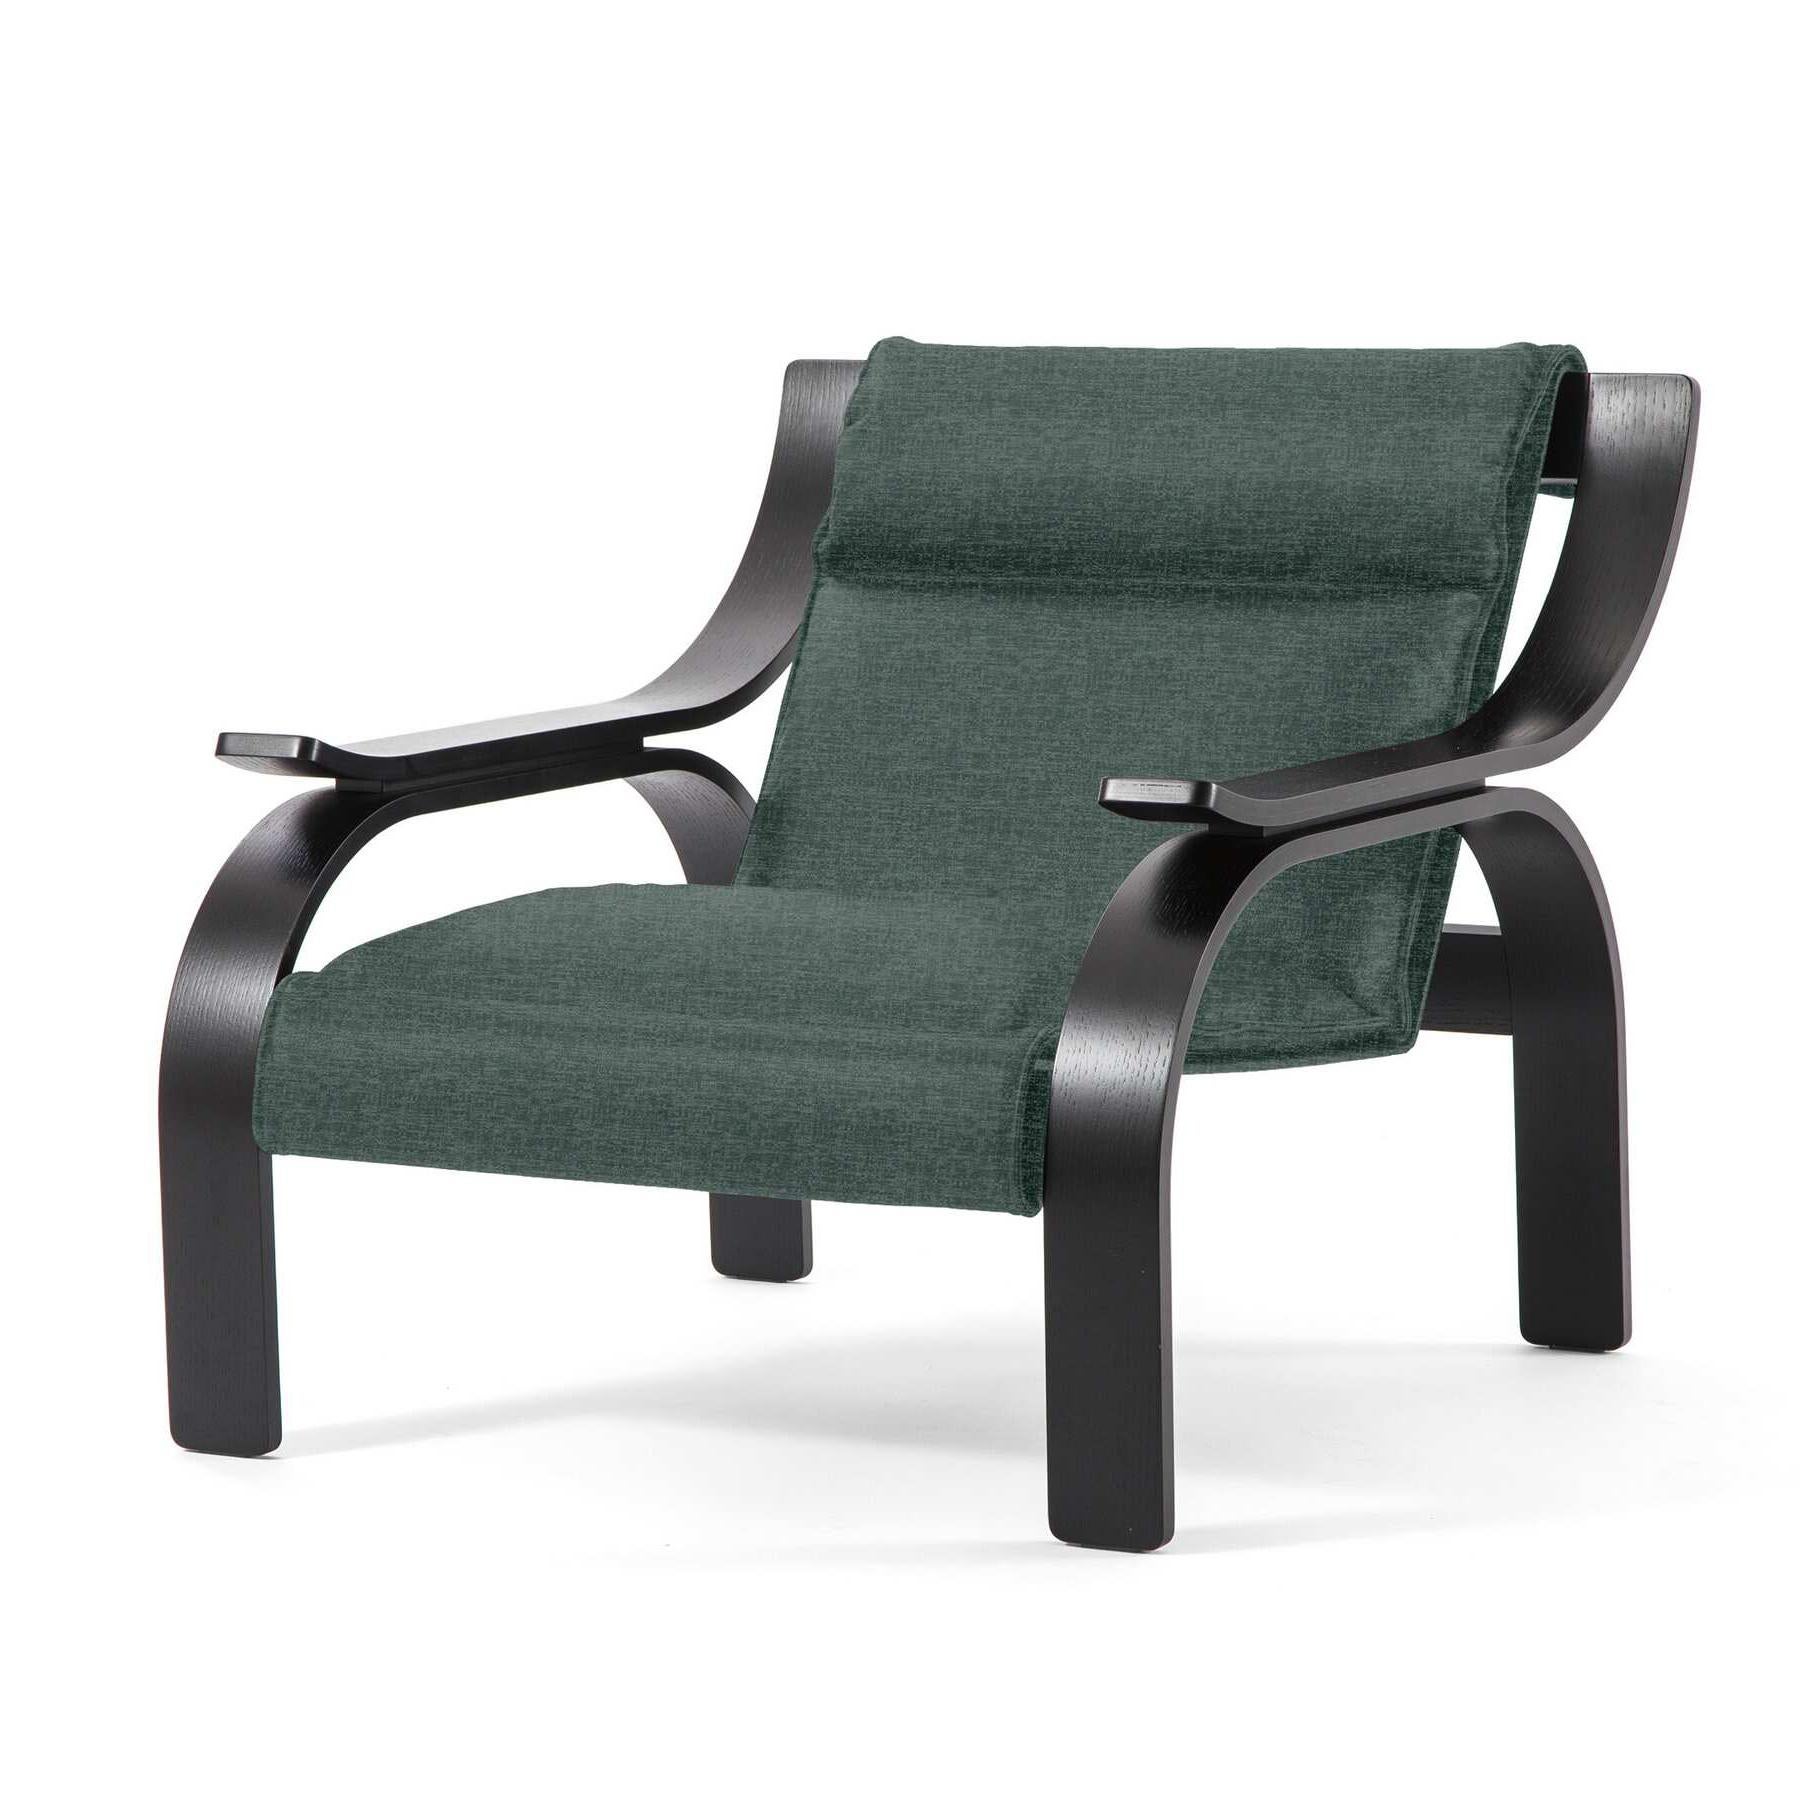 Woodline armchair designed by Marco Zanuso in 1964, relaunched in 2015.

Green fabric and black stained wood.

Manufactured by Cassina in Italy.

An armchair with a striking, rigorous design, the outcome of research by Marco Zanuso on how to anchor